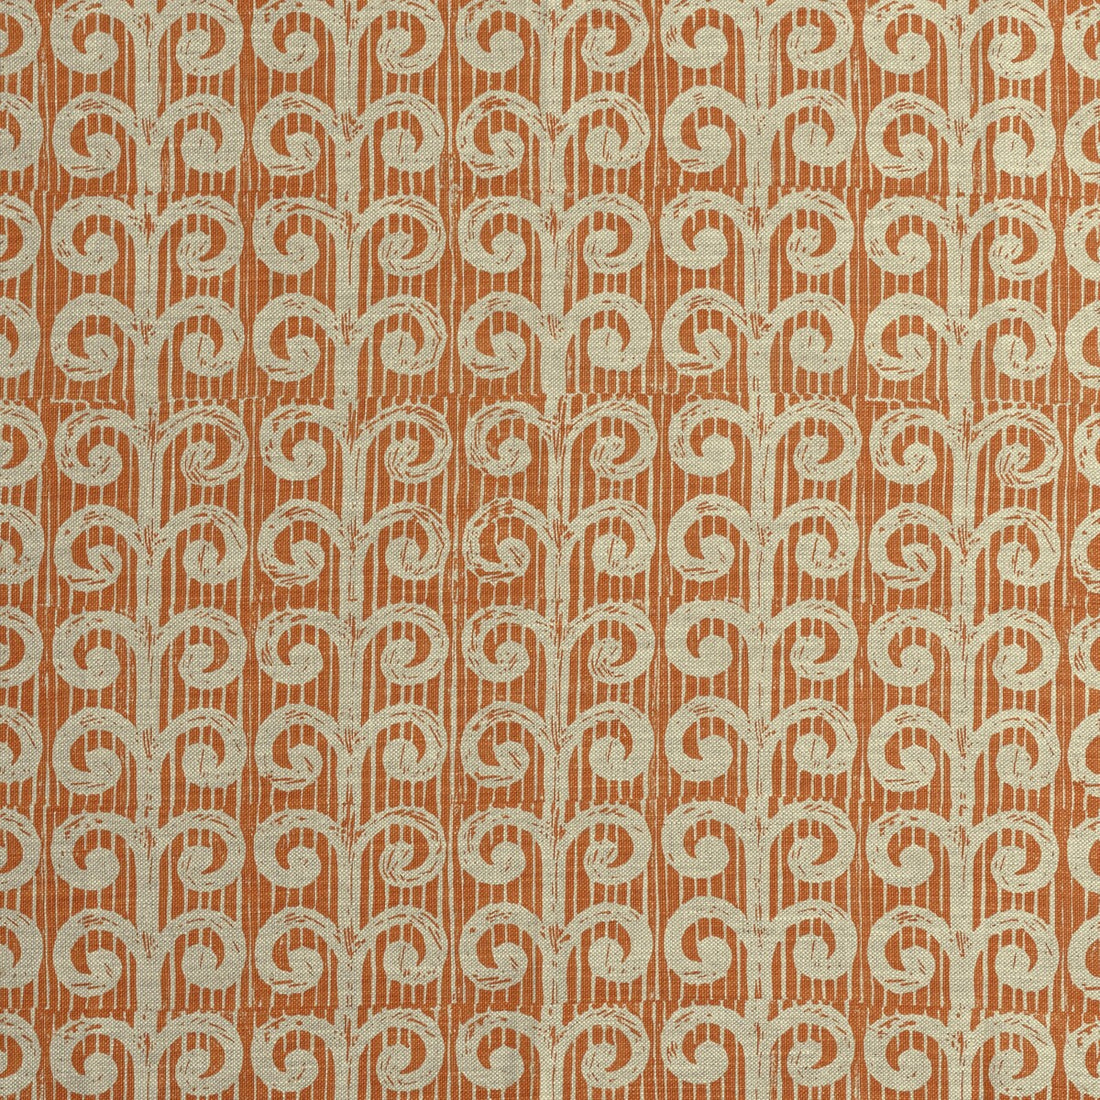 Fern fabric in tangerine color - pattern BFC-3673.12.0 - by Lee Jofa in the Blithfield collection